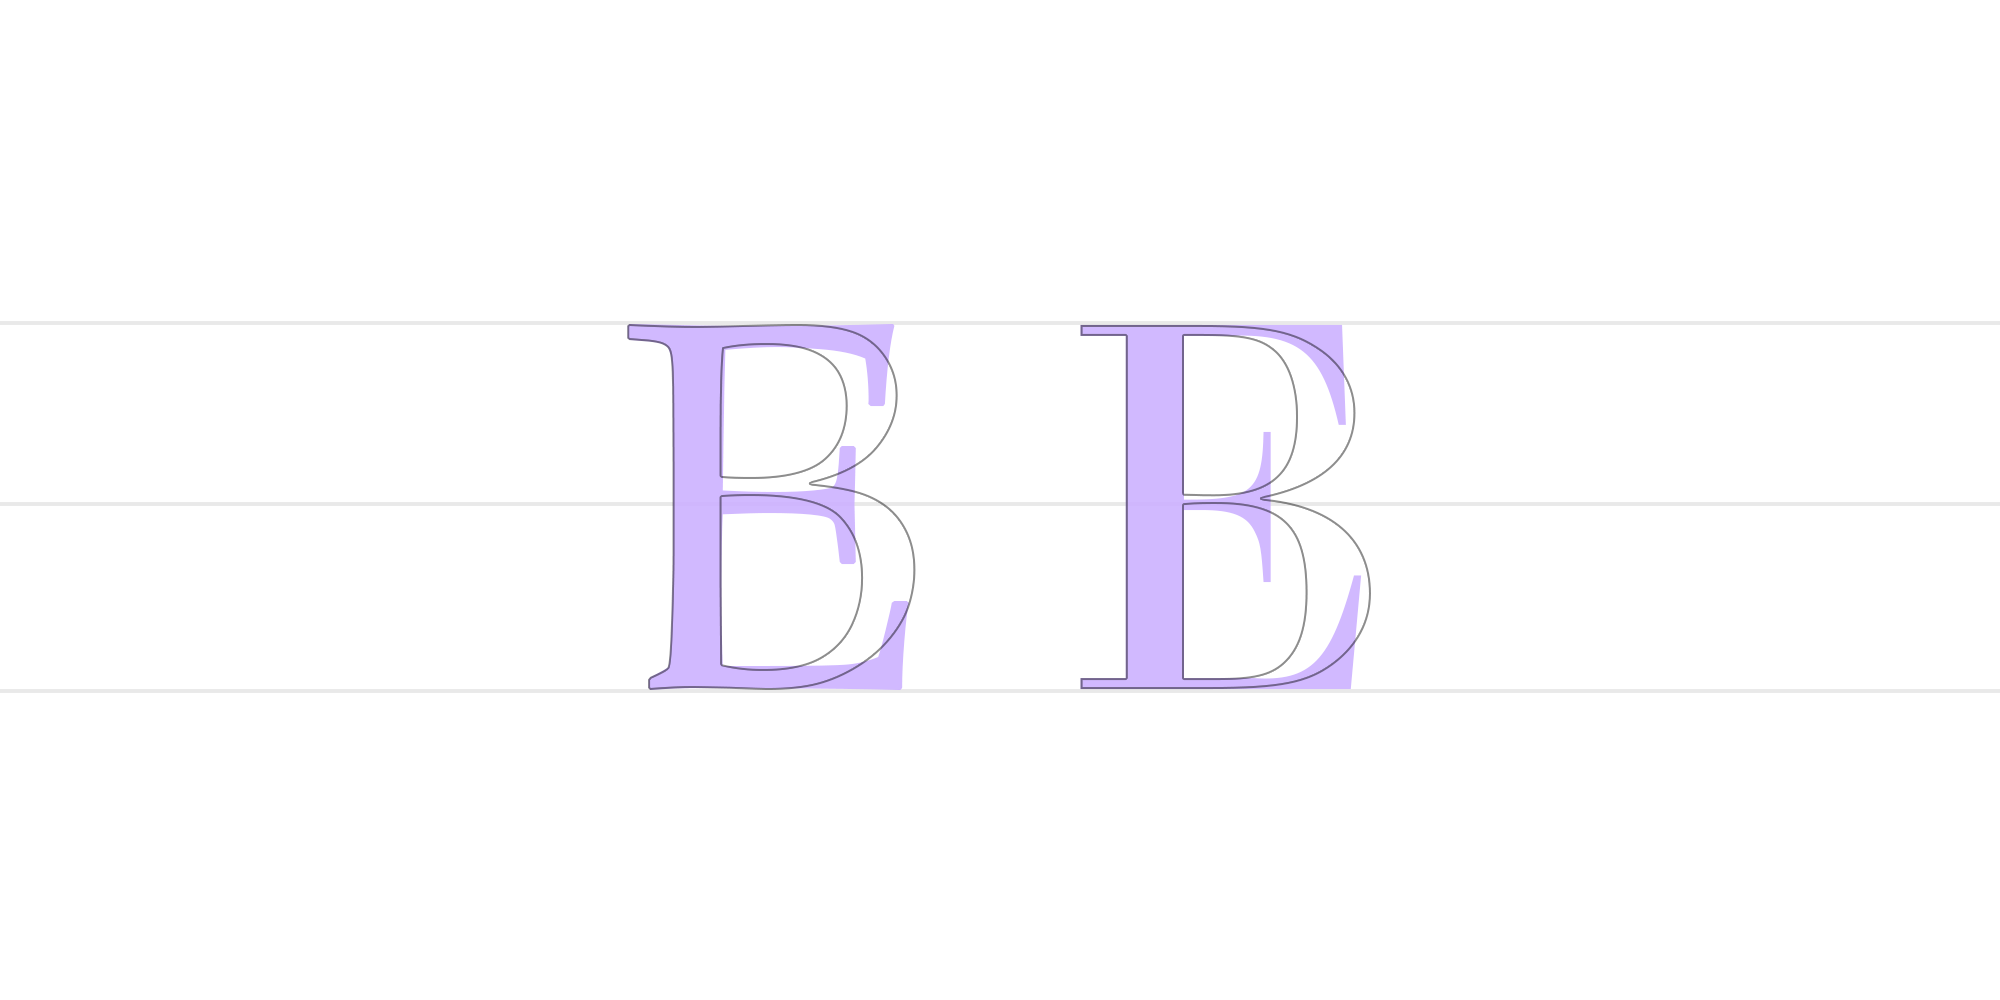 The Letter “B” — The Architecture Behind, by Dobromir Kostadinov, Design  Guidance